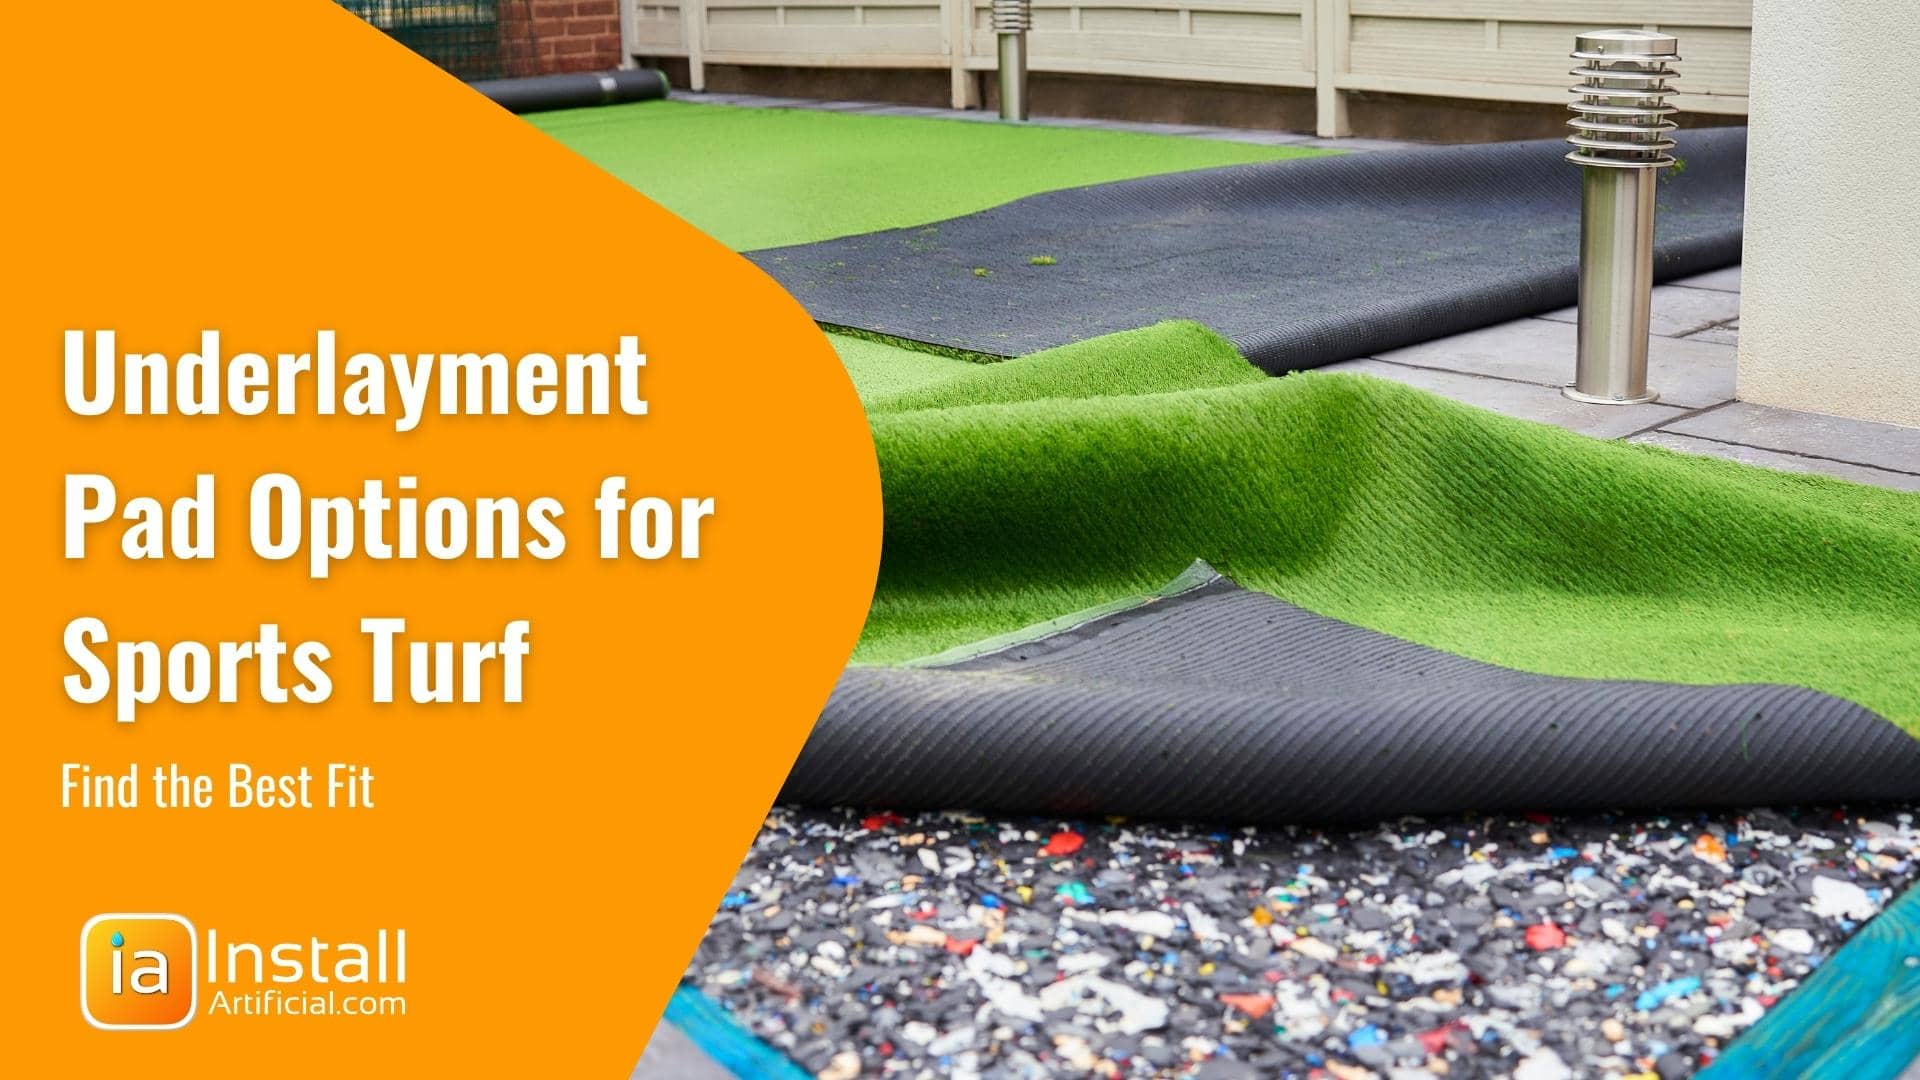 Underlayment Pad Options for Sports Turf